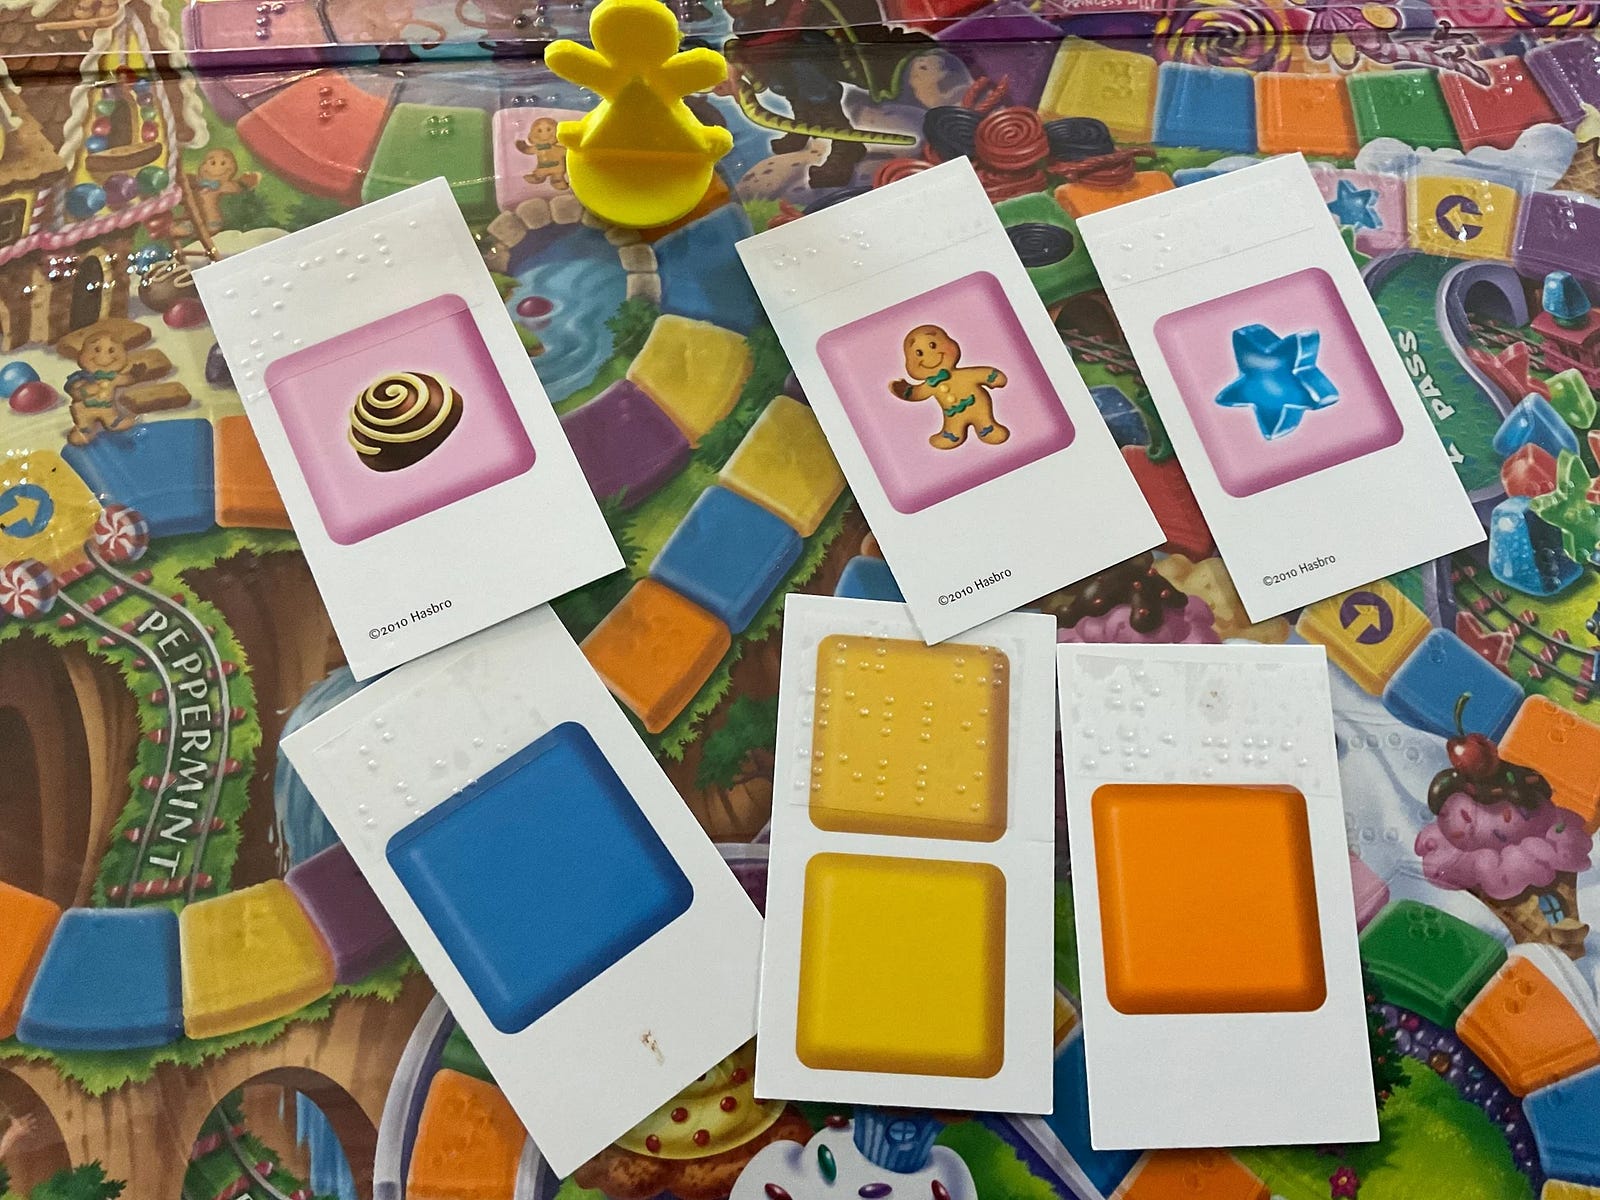 A photo of cards from the game Candy Land